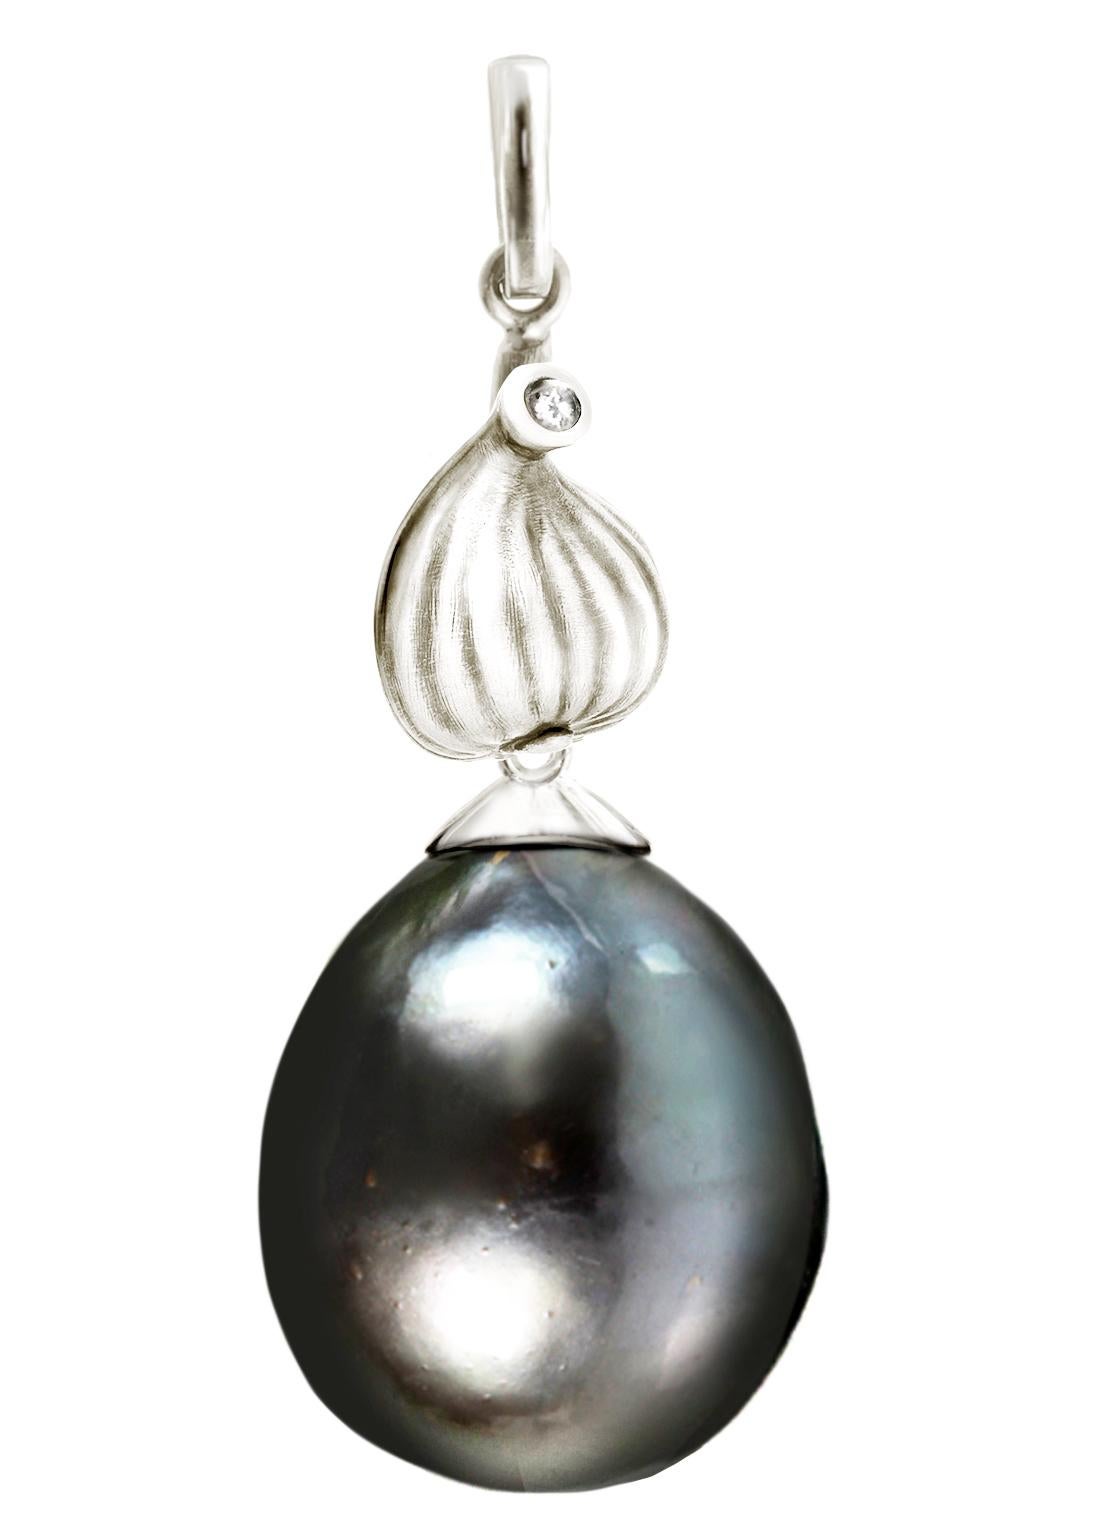 These Fig cocktail earrings are made of 18 karat white gold with detachable 11 mm Tahitian black pearls and two diamonds. The earrings by the artist were featured in Vogue UA review. We use top natural diamonds VS, F-G, we work with german gems